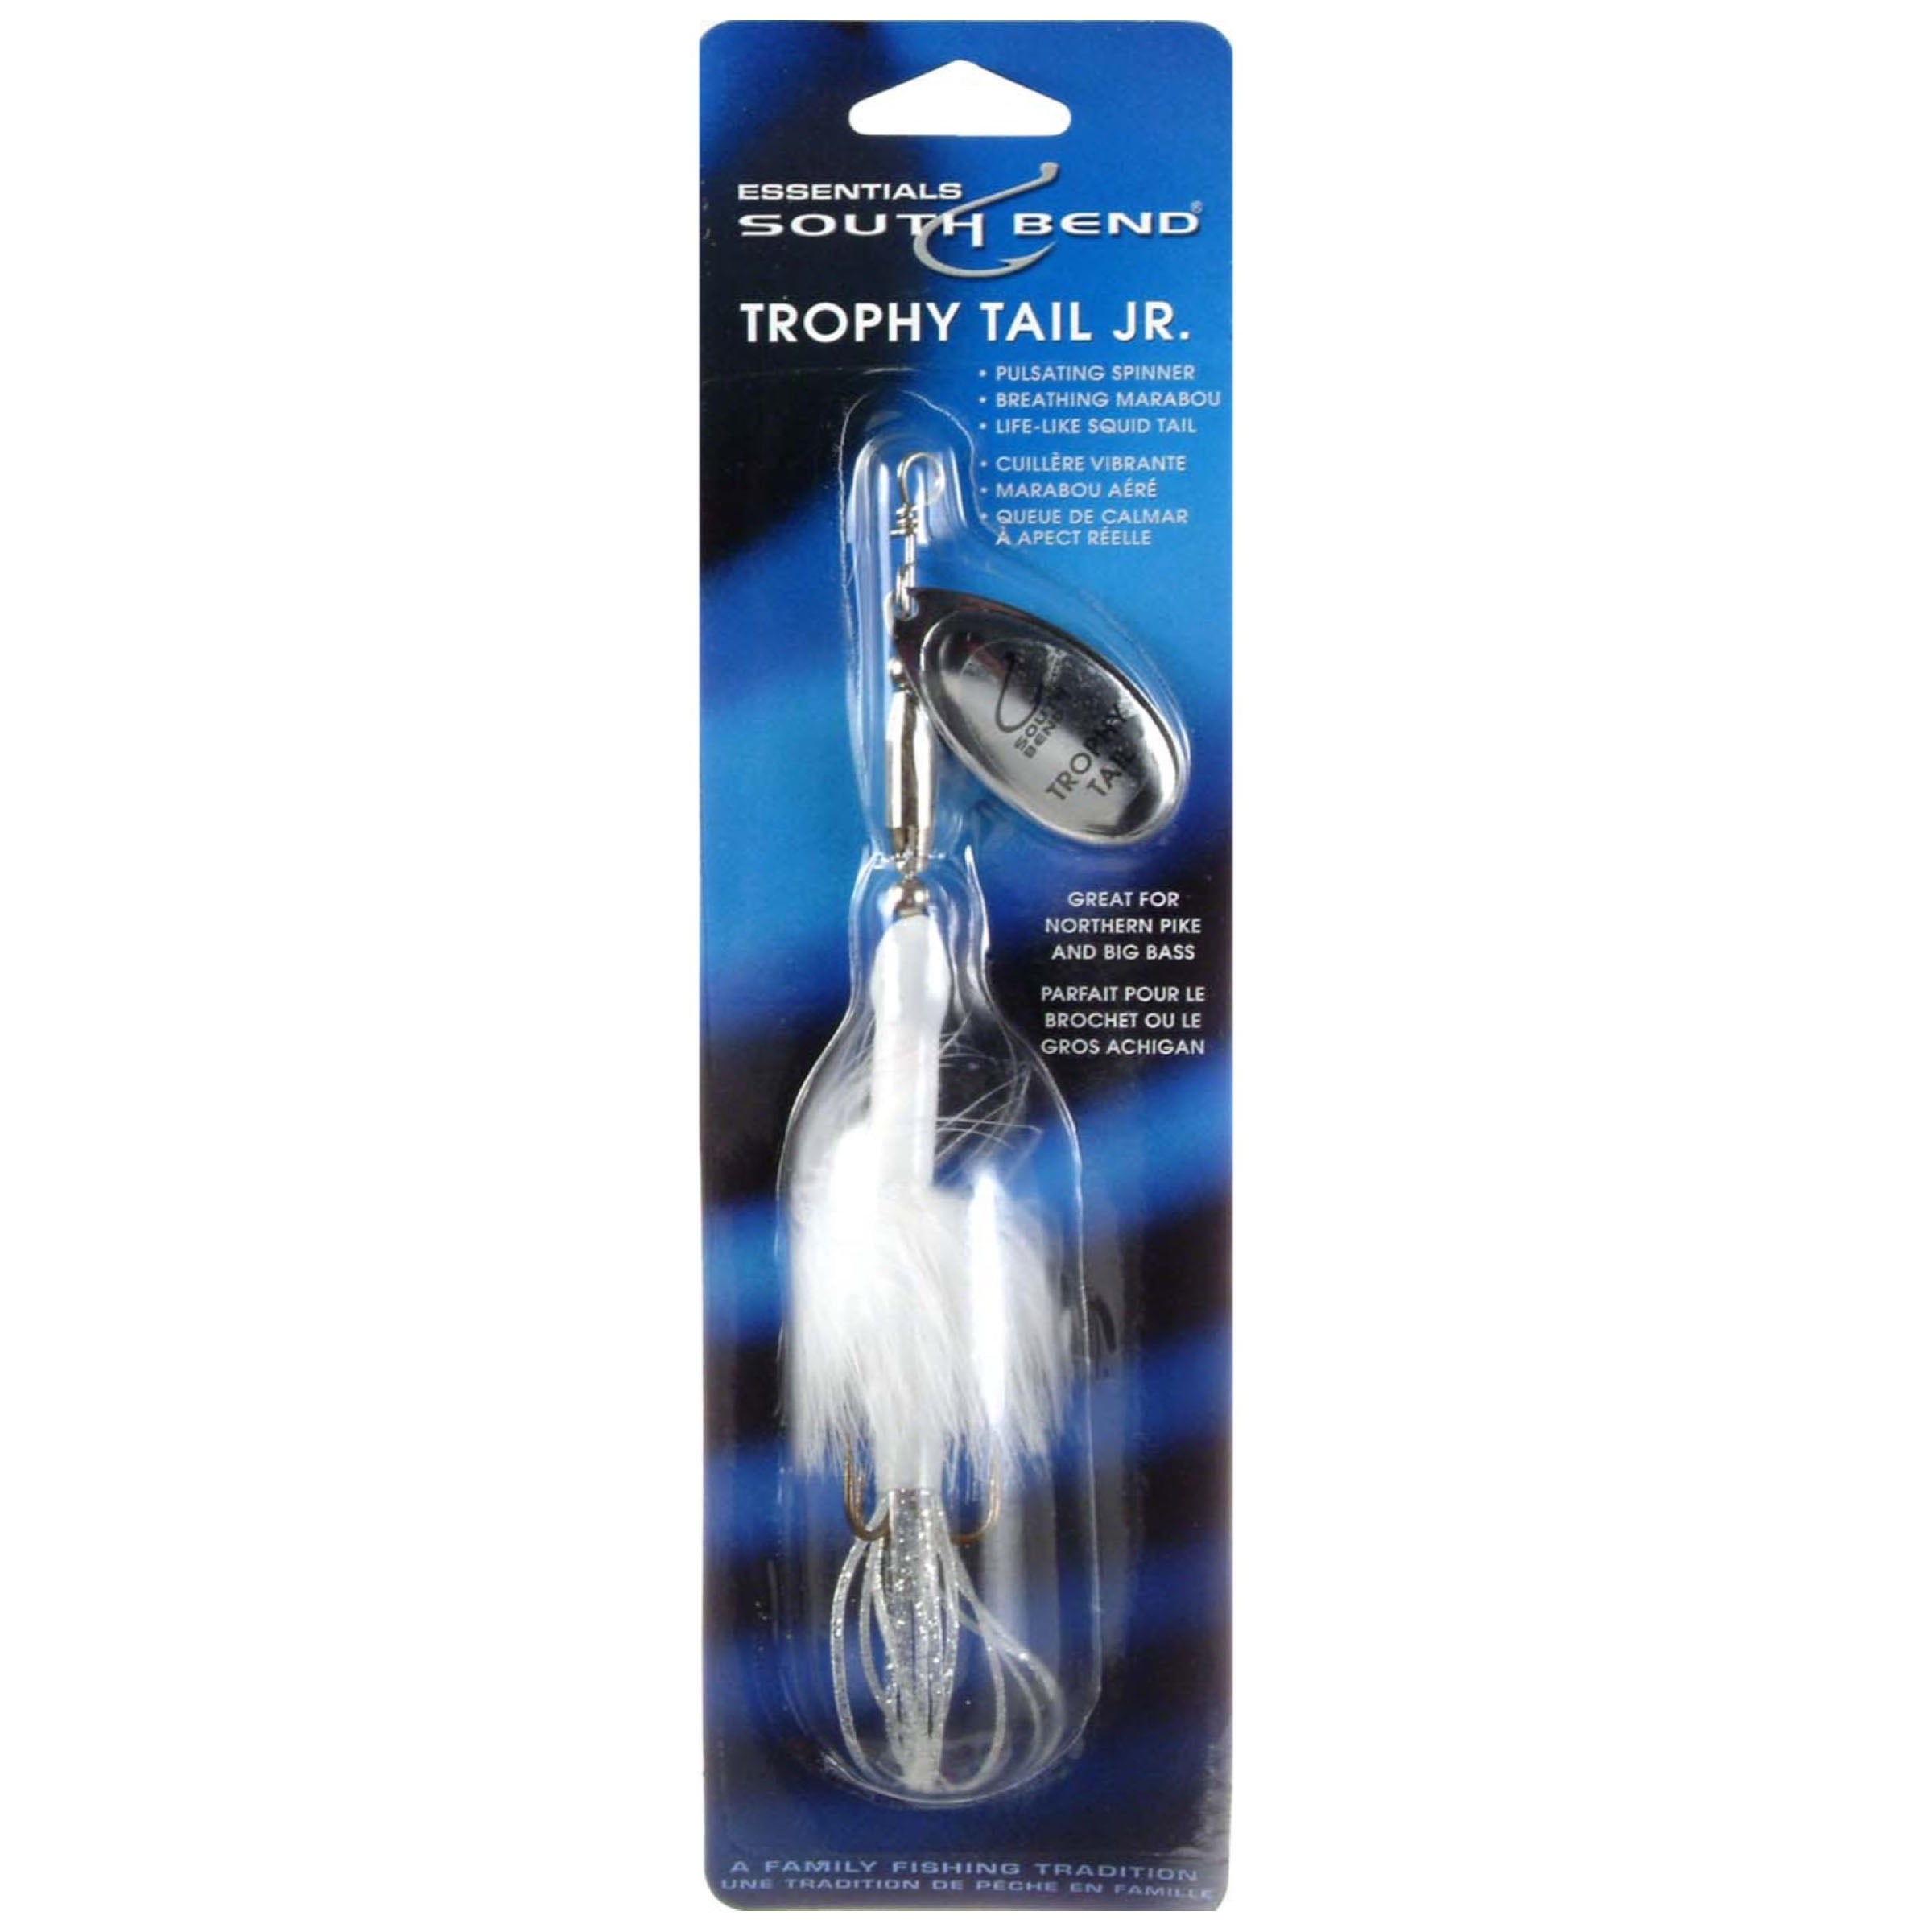 South Bend® Essentials Trophy Tail Junior Fishing Lure